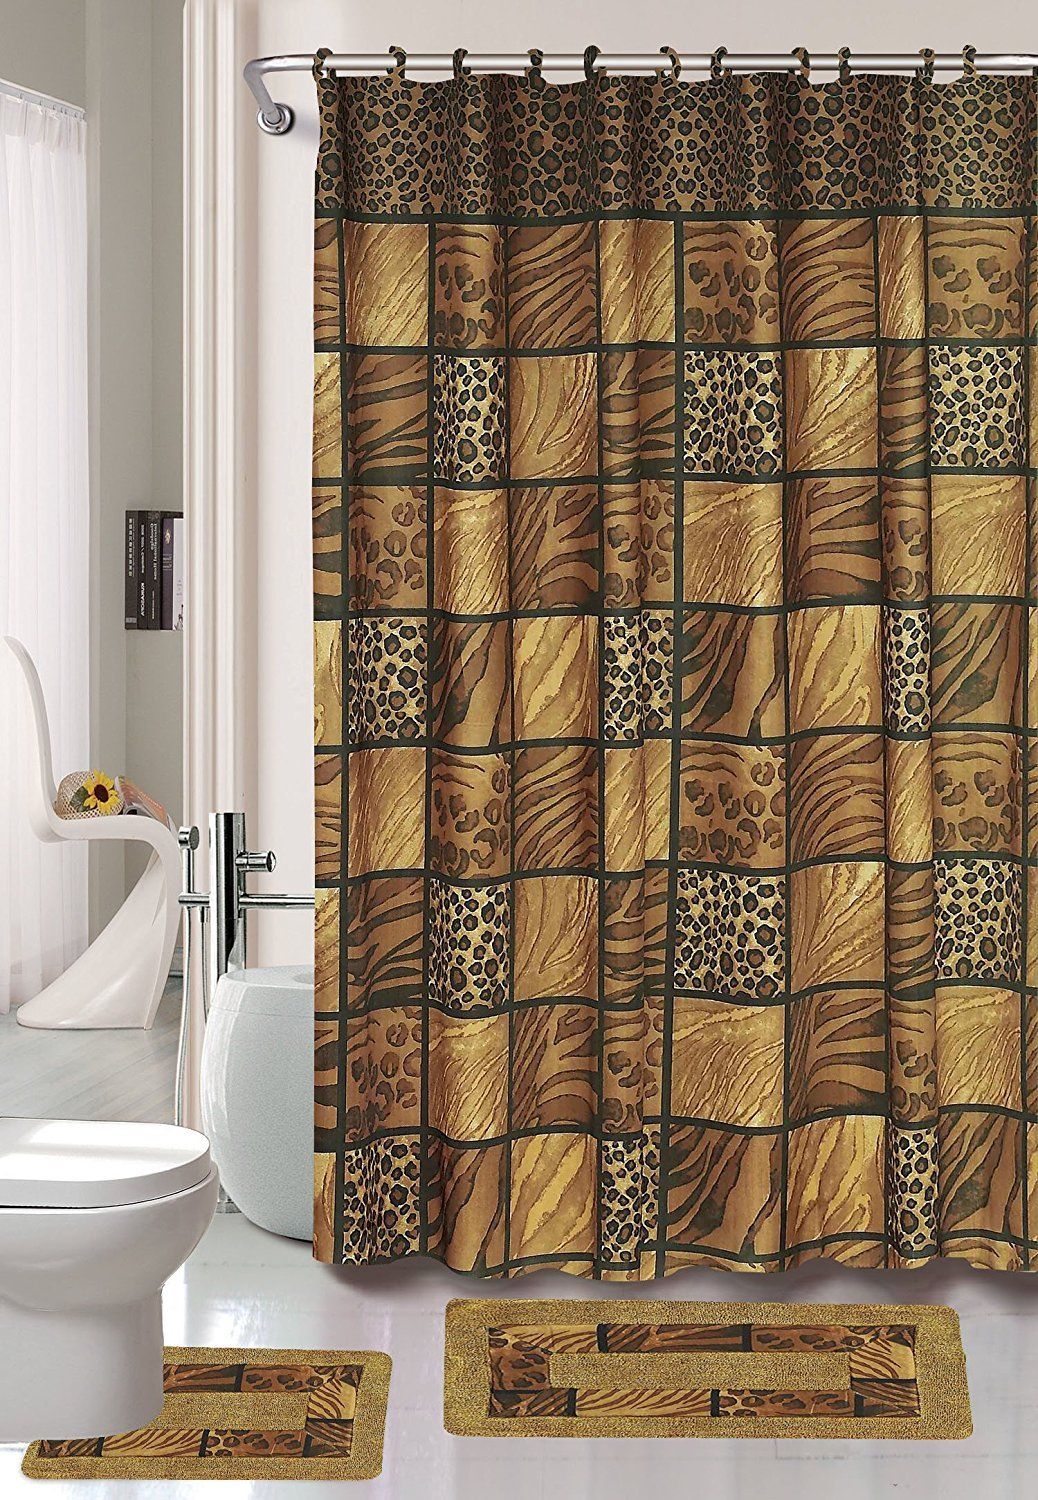 Leopard Brown Animal 15-Piece Bathroom Accessory Set 2 Bath Mats Shower Curtain & Rings - image 1 of 1